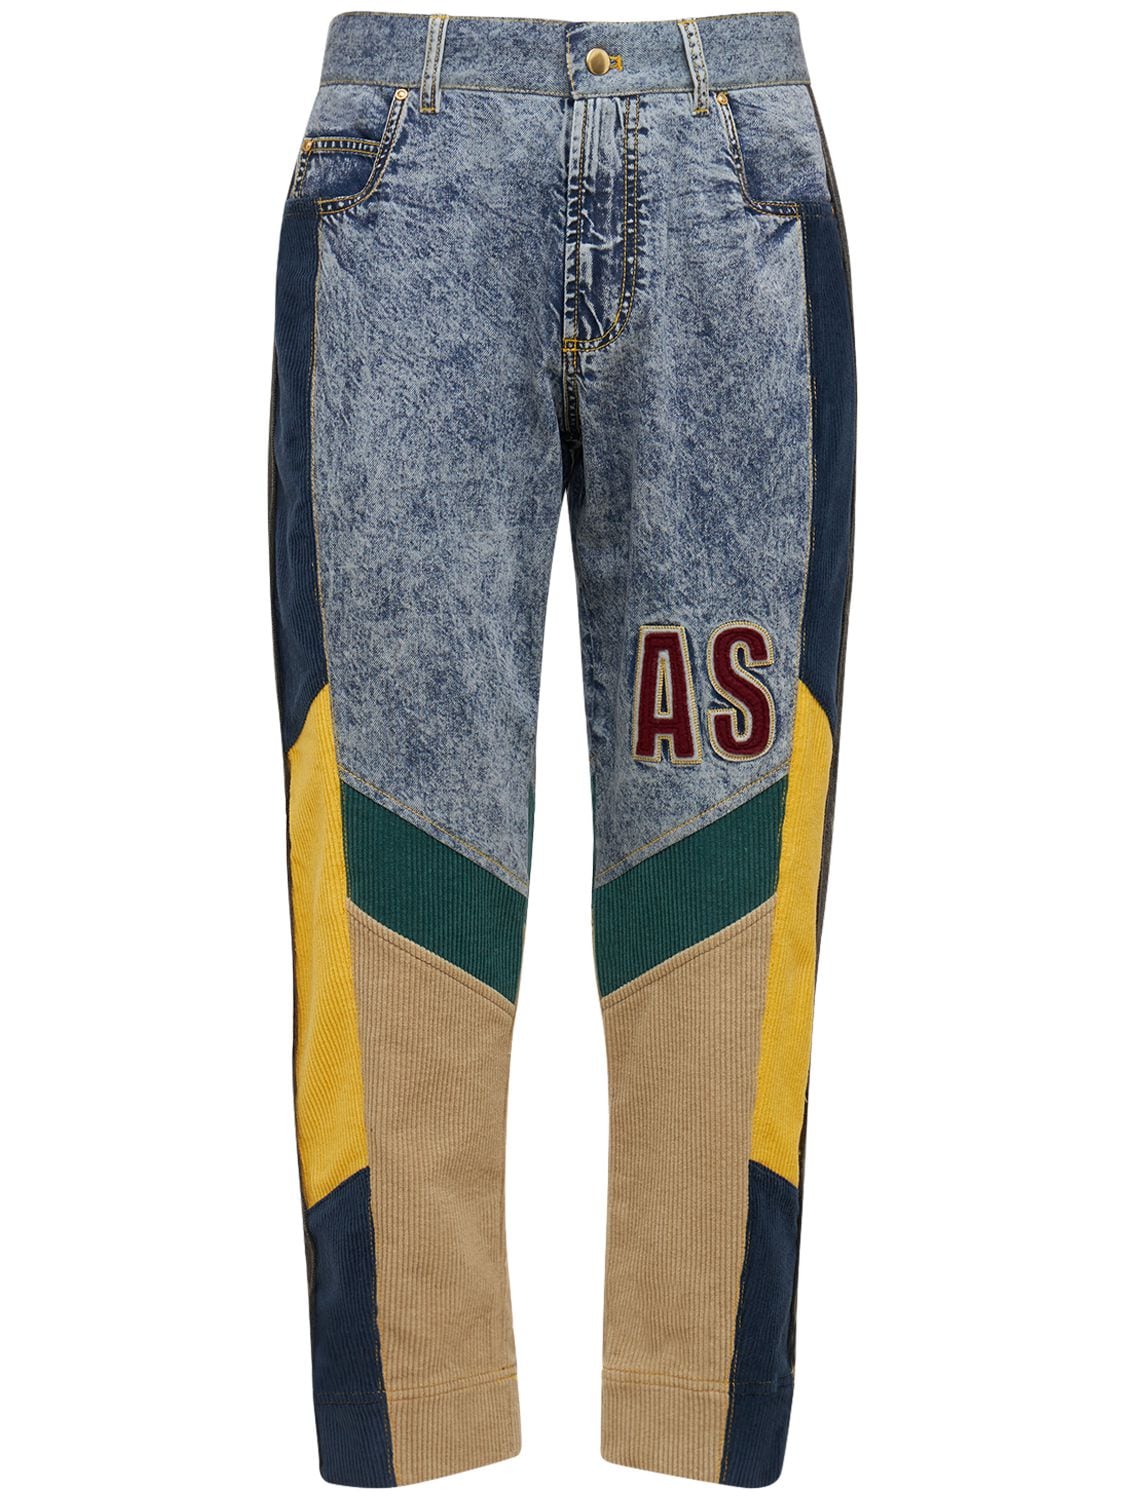 ALPHASTYLE PENNY PATCHWORK JEANS